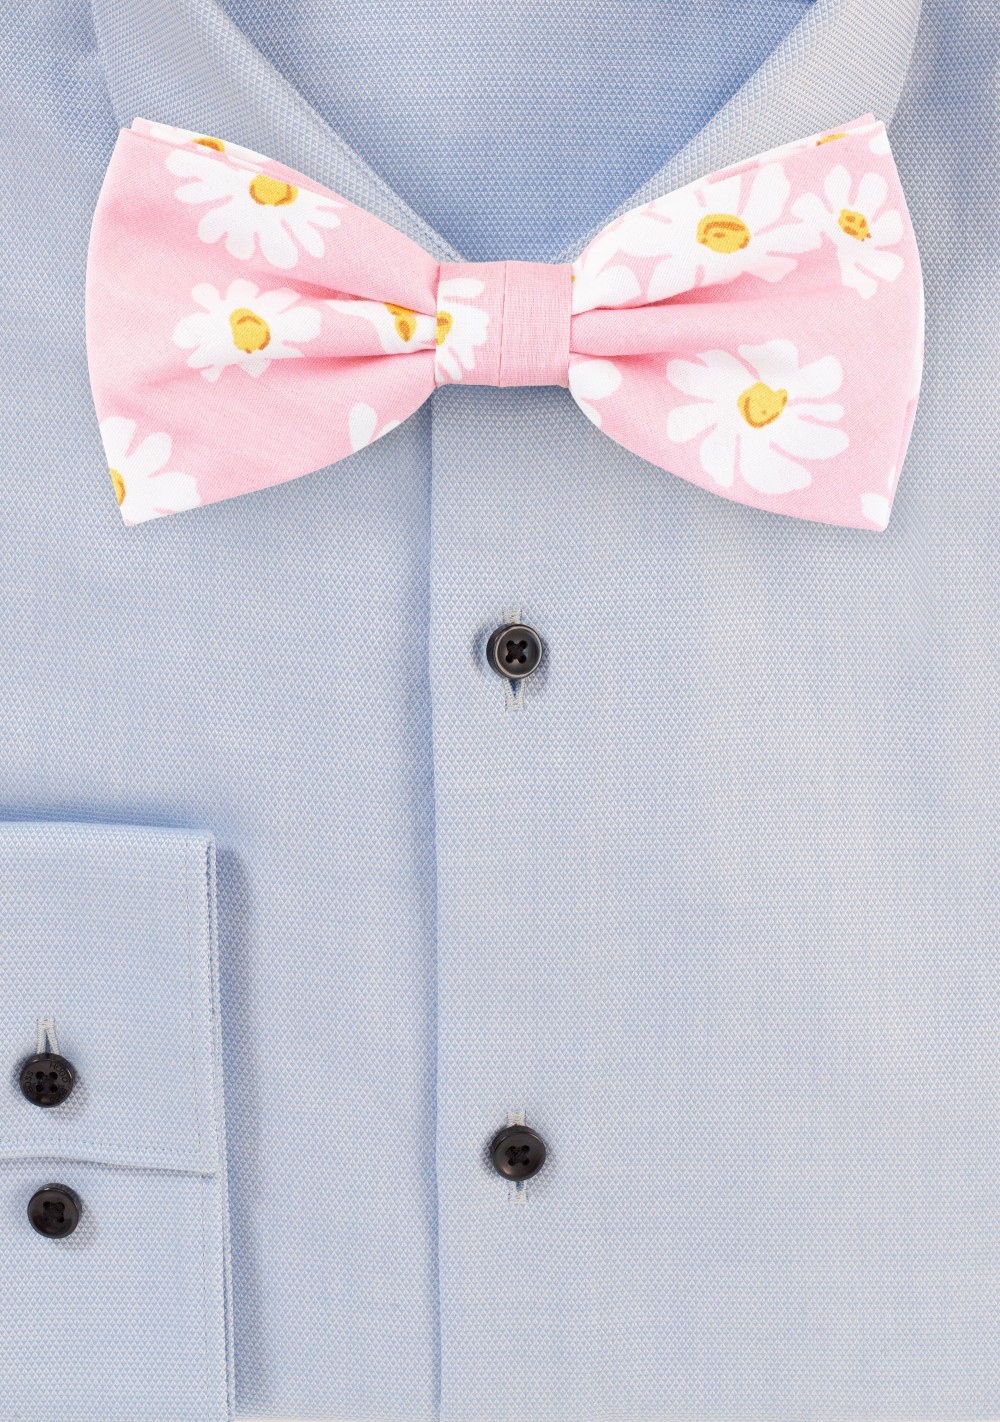 Pink Bow Tie with White Flower Design